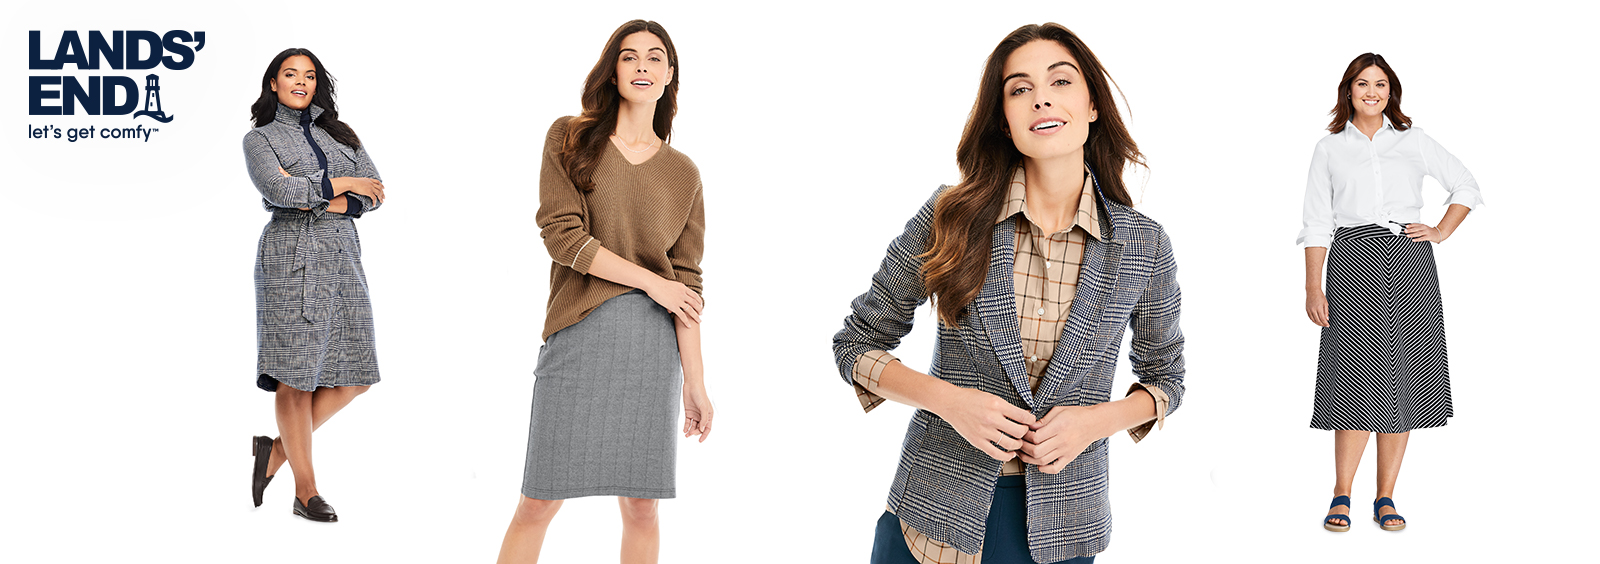 Business Casual Winter Wear for the Office